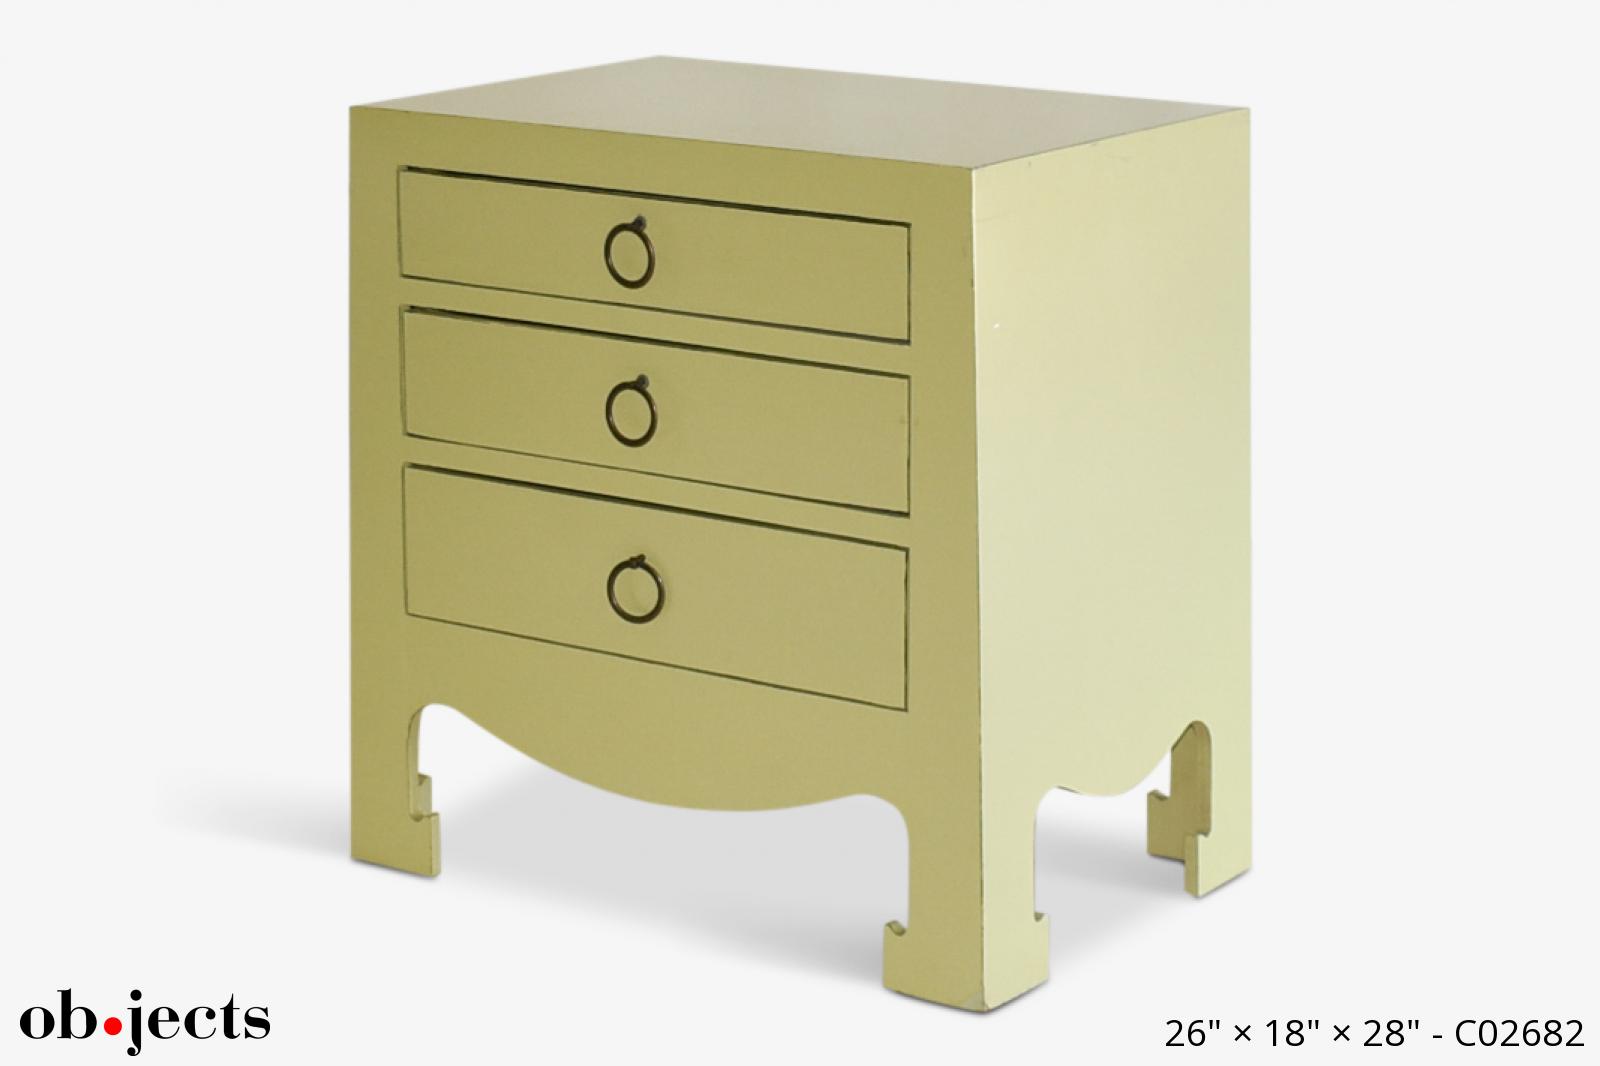 Dresser Light Green Lacquer W 3 Drawers Ob Jects